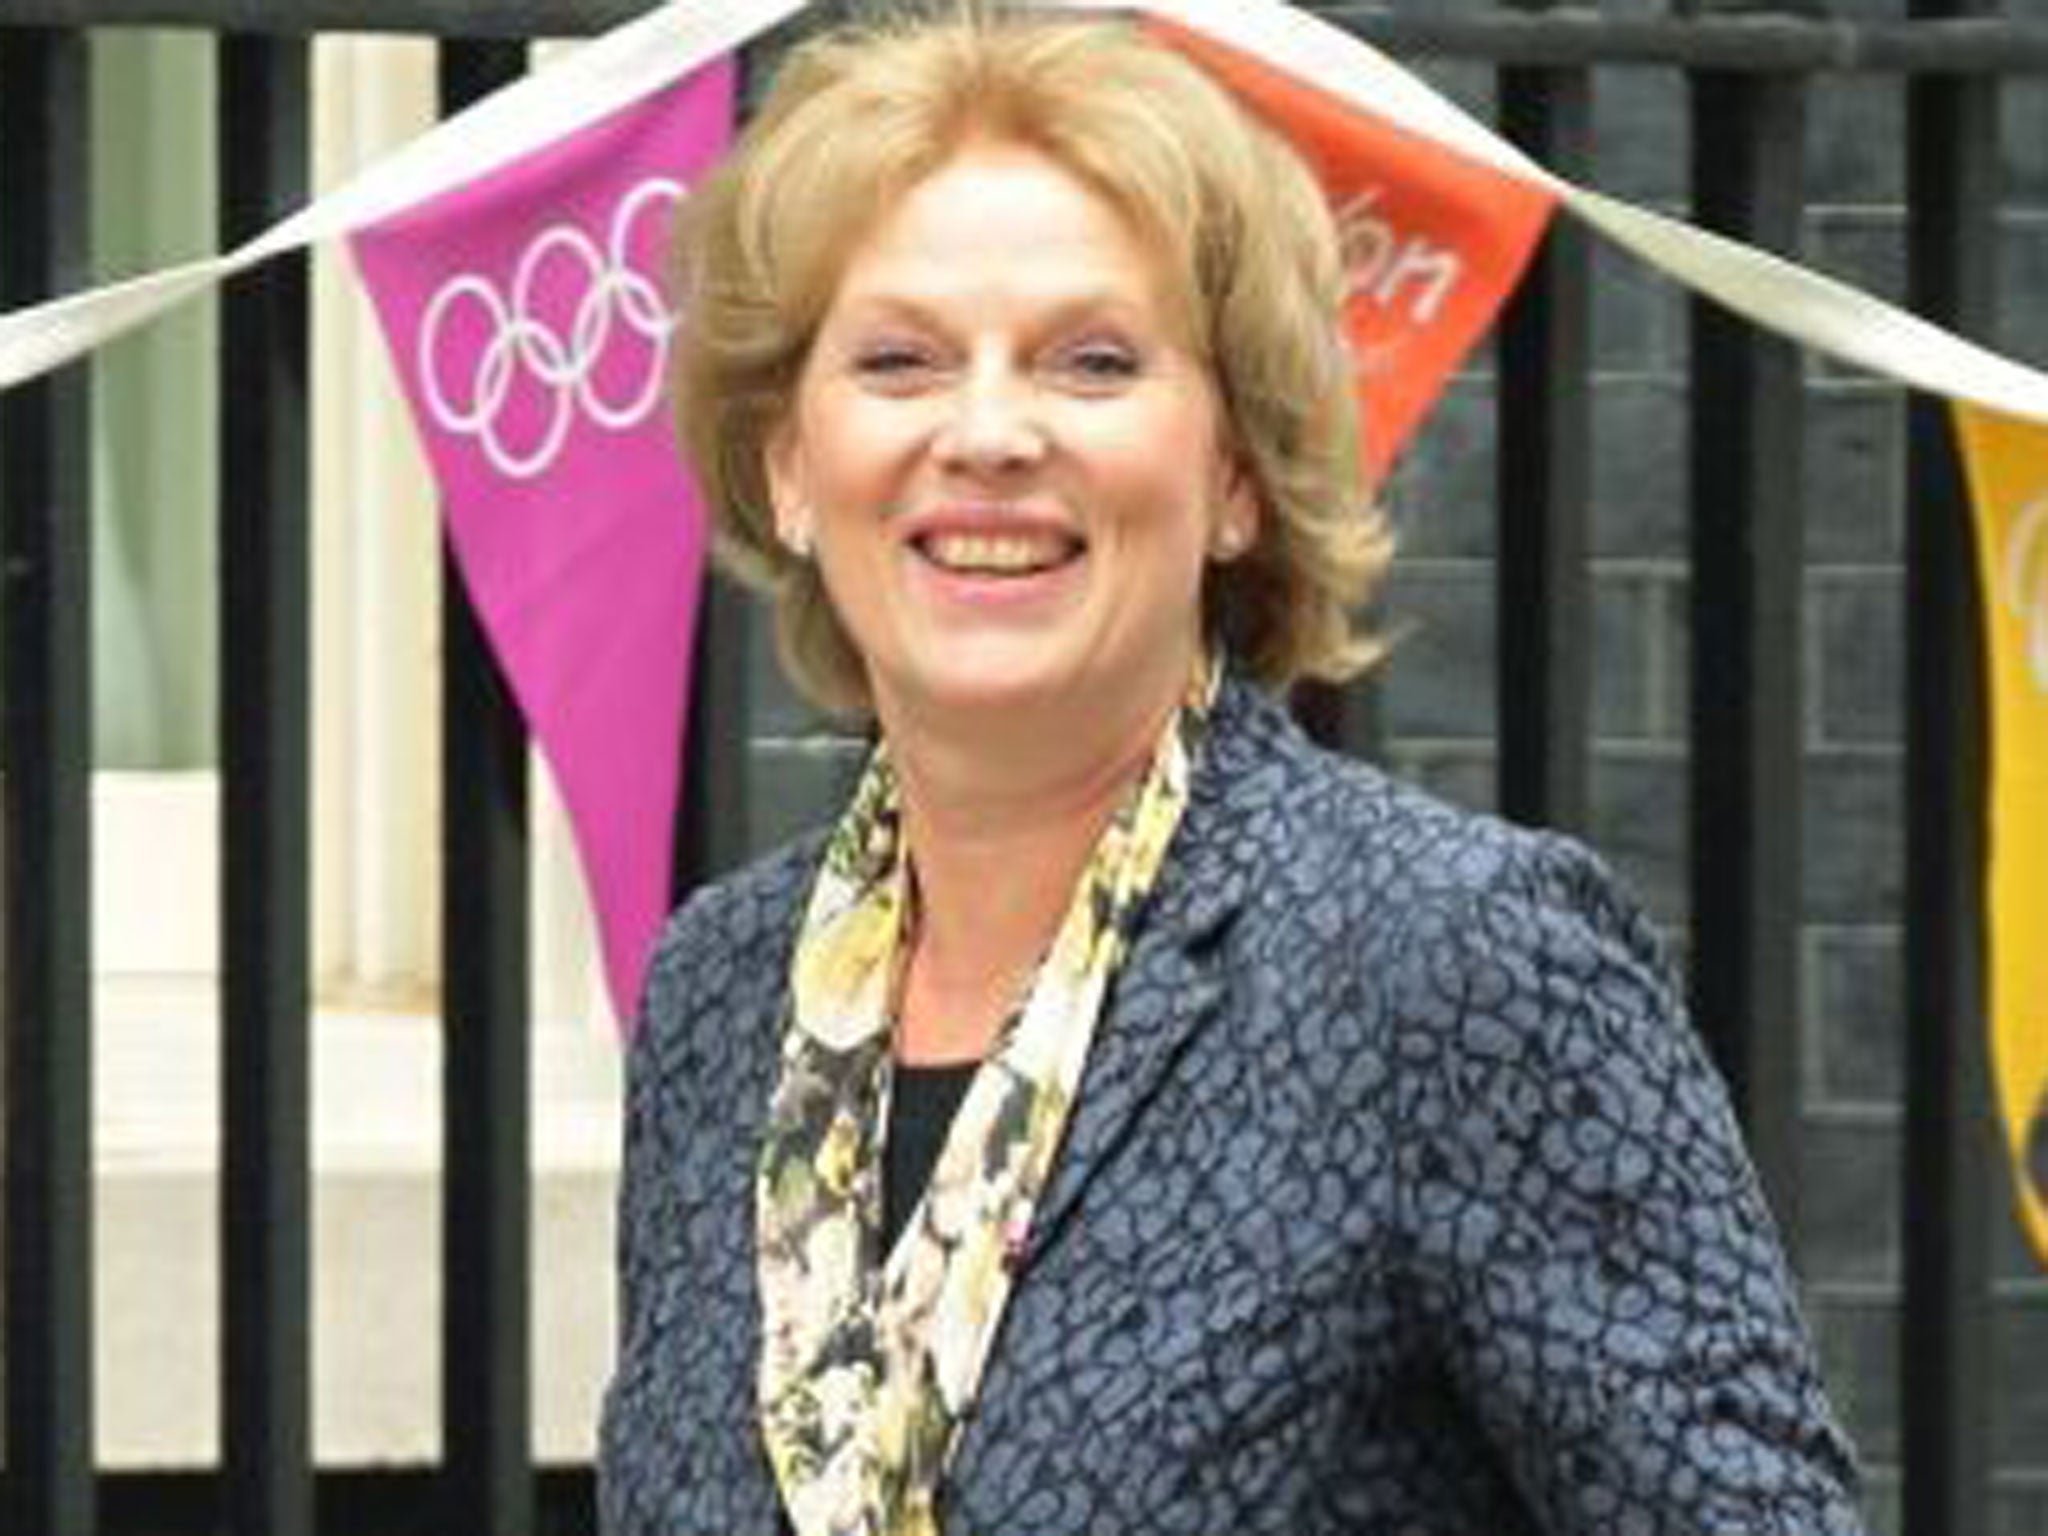 Anna Soubry was criticised for suggesting female doctors who cut back their hours after having children were a drain on the NHS